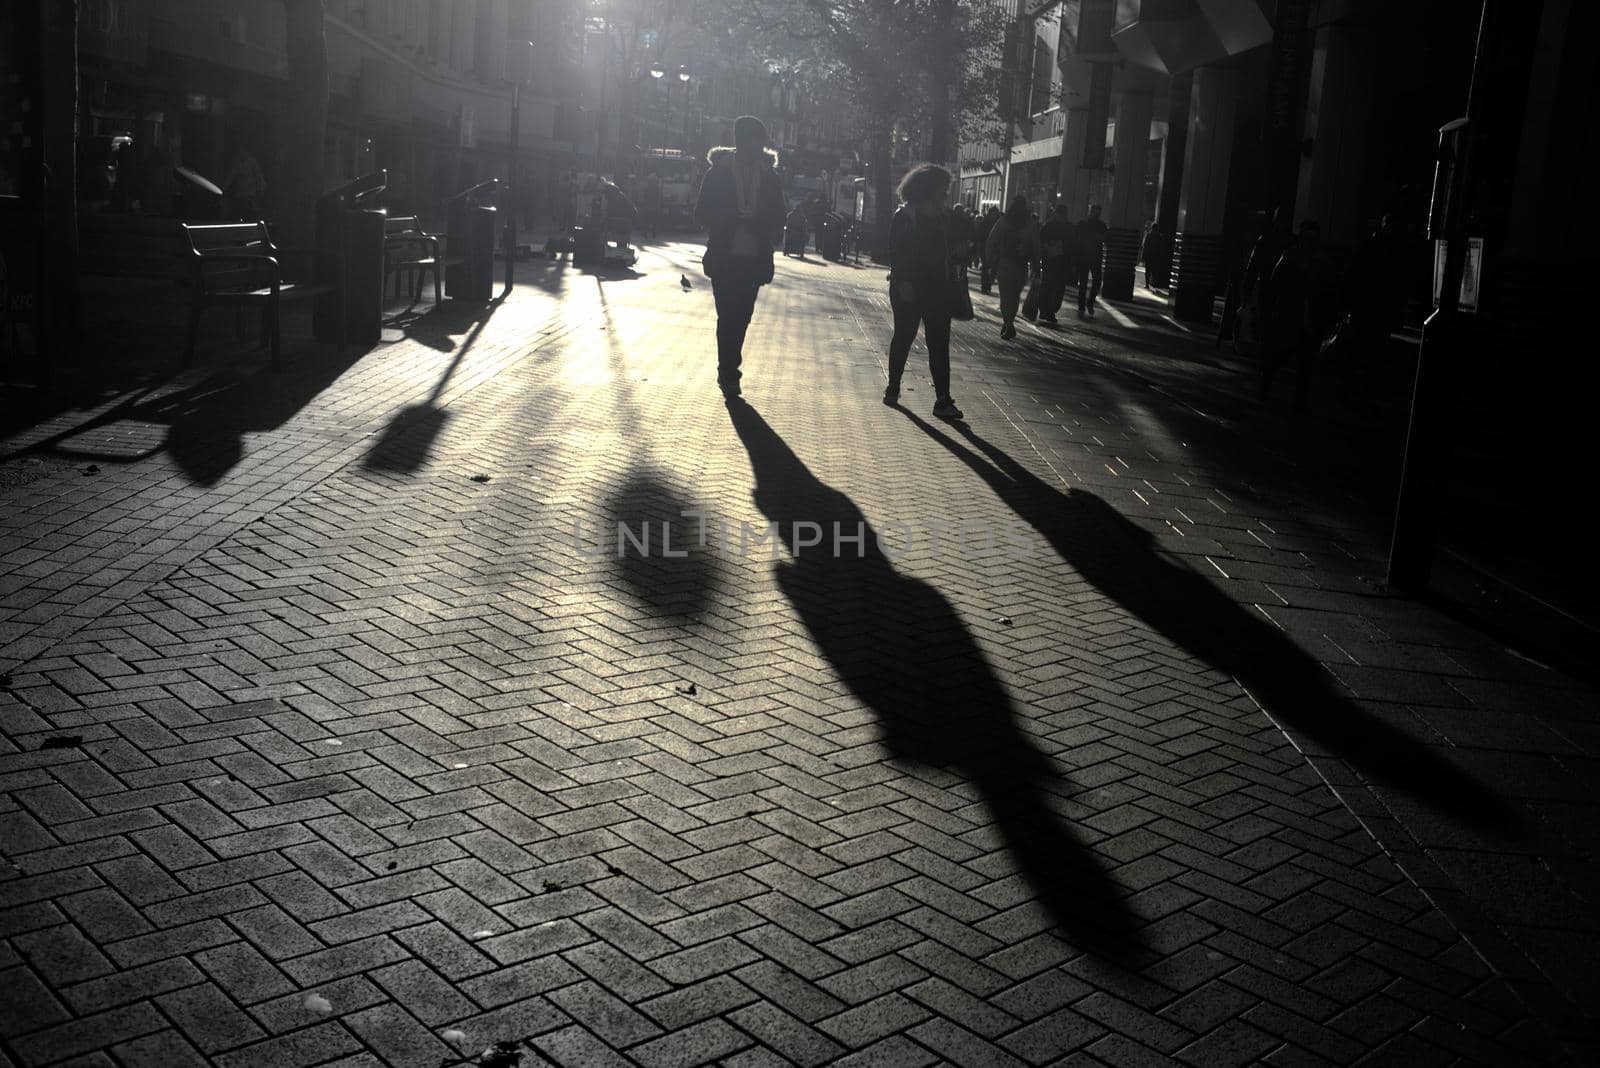 Blurry shadows and silhouettes of pedestrian in the city at sunset, London,UK.